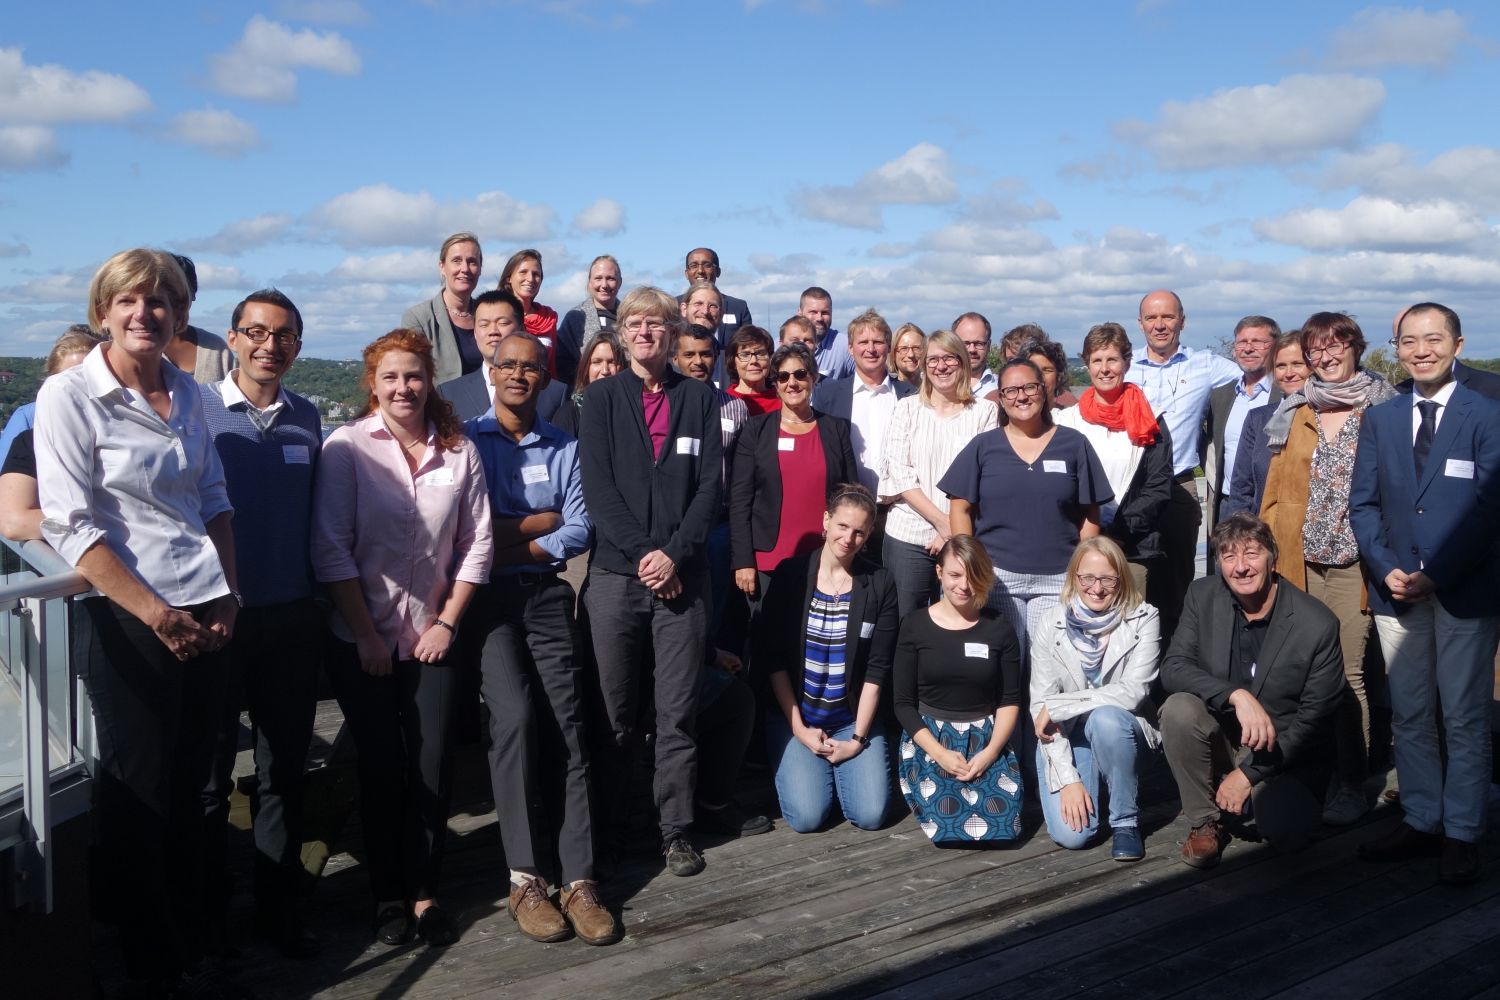 German-Canadian Research Alumni Conference in the Marine Sciences: More than 20 Kiel Research Alumni take the opportunity to exchange ideas with marine researchers currently conducting research in Kiel and Halifax. Photo: Wiebke Müller-Lupp, The Future Ocean